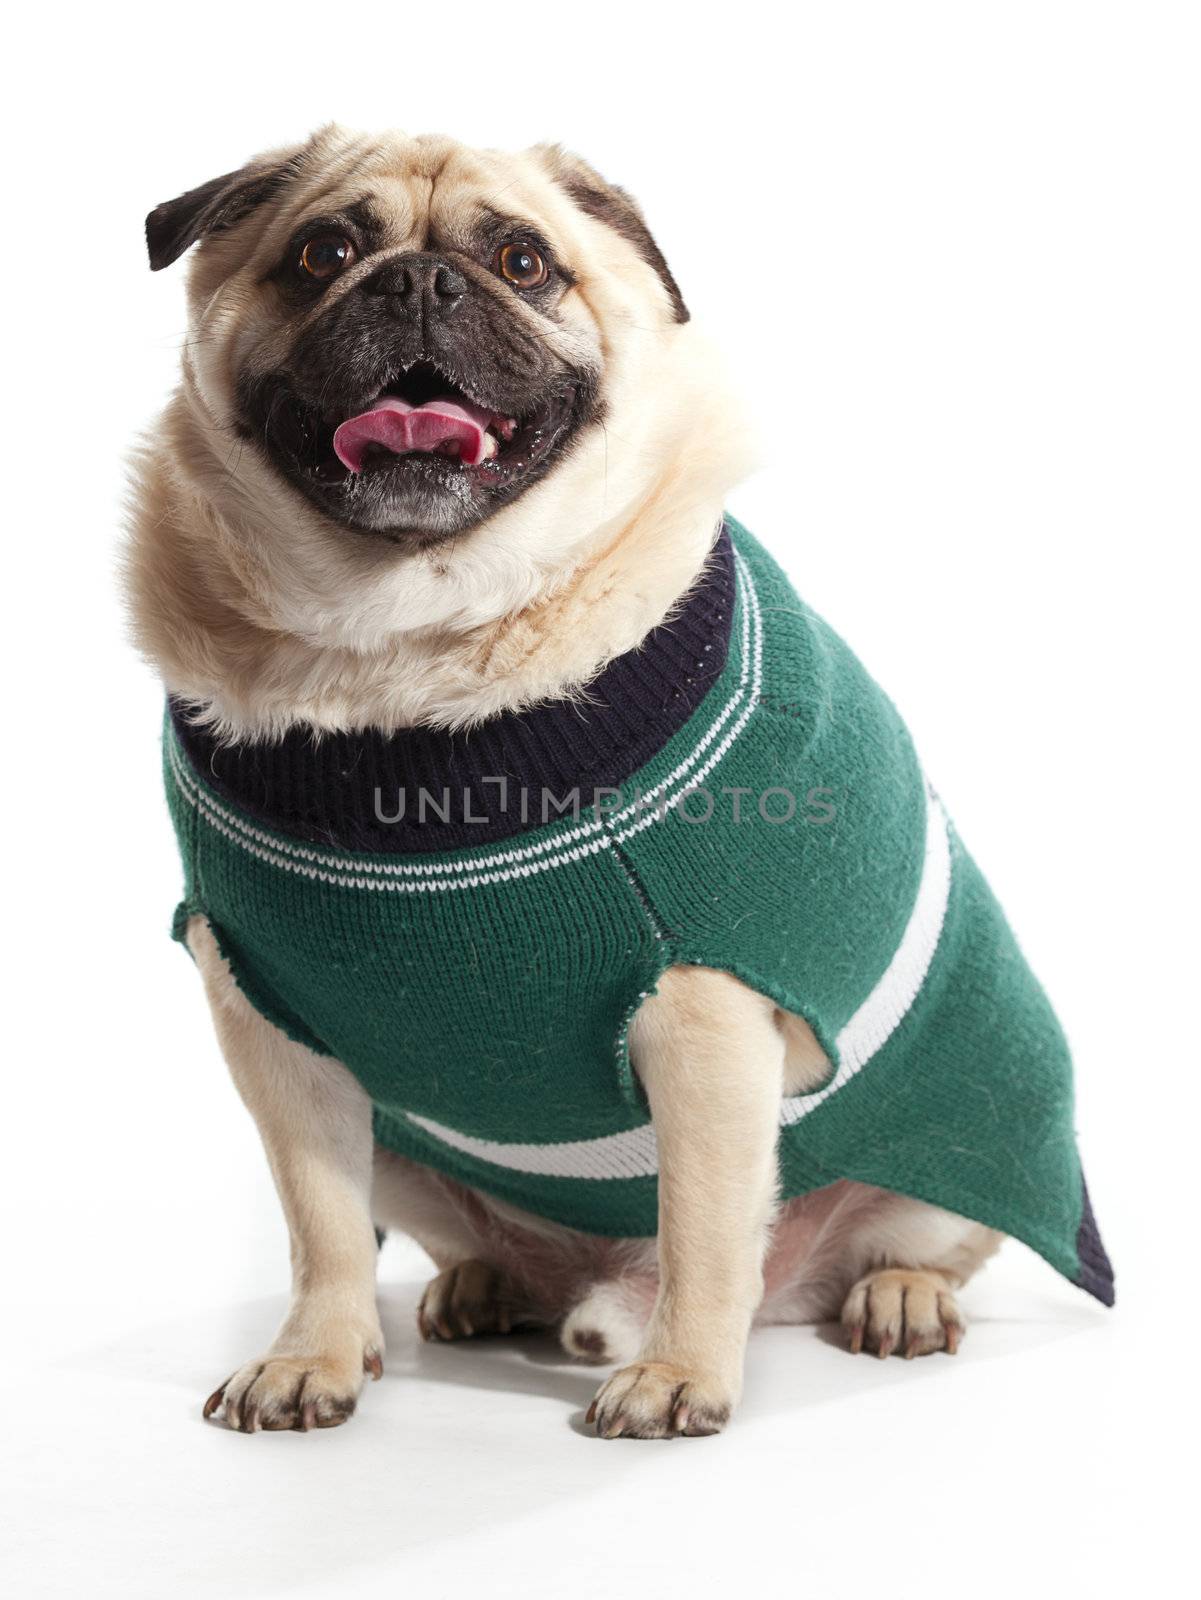 A pug wearing a sweater sitting on a white background